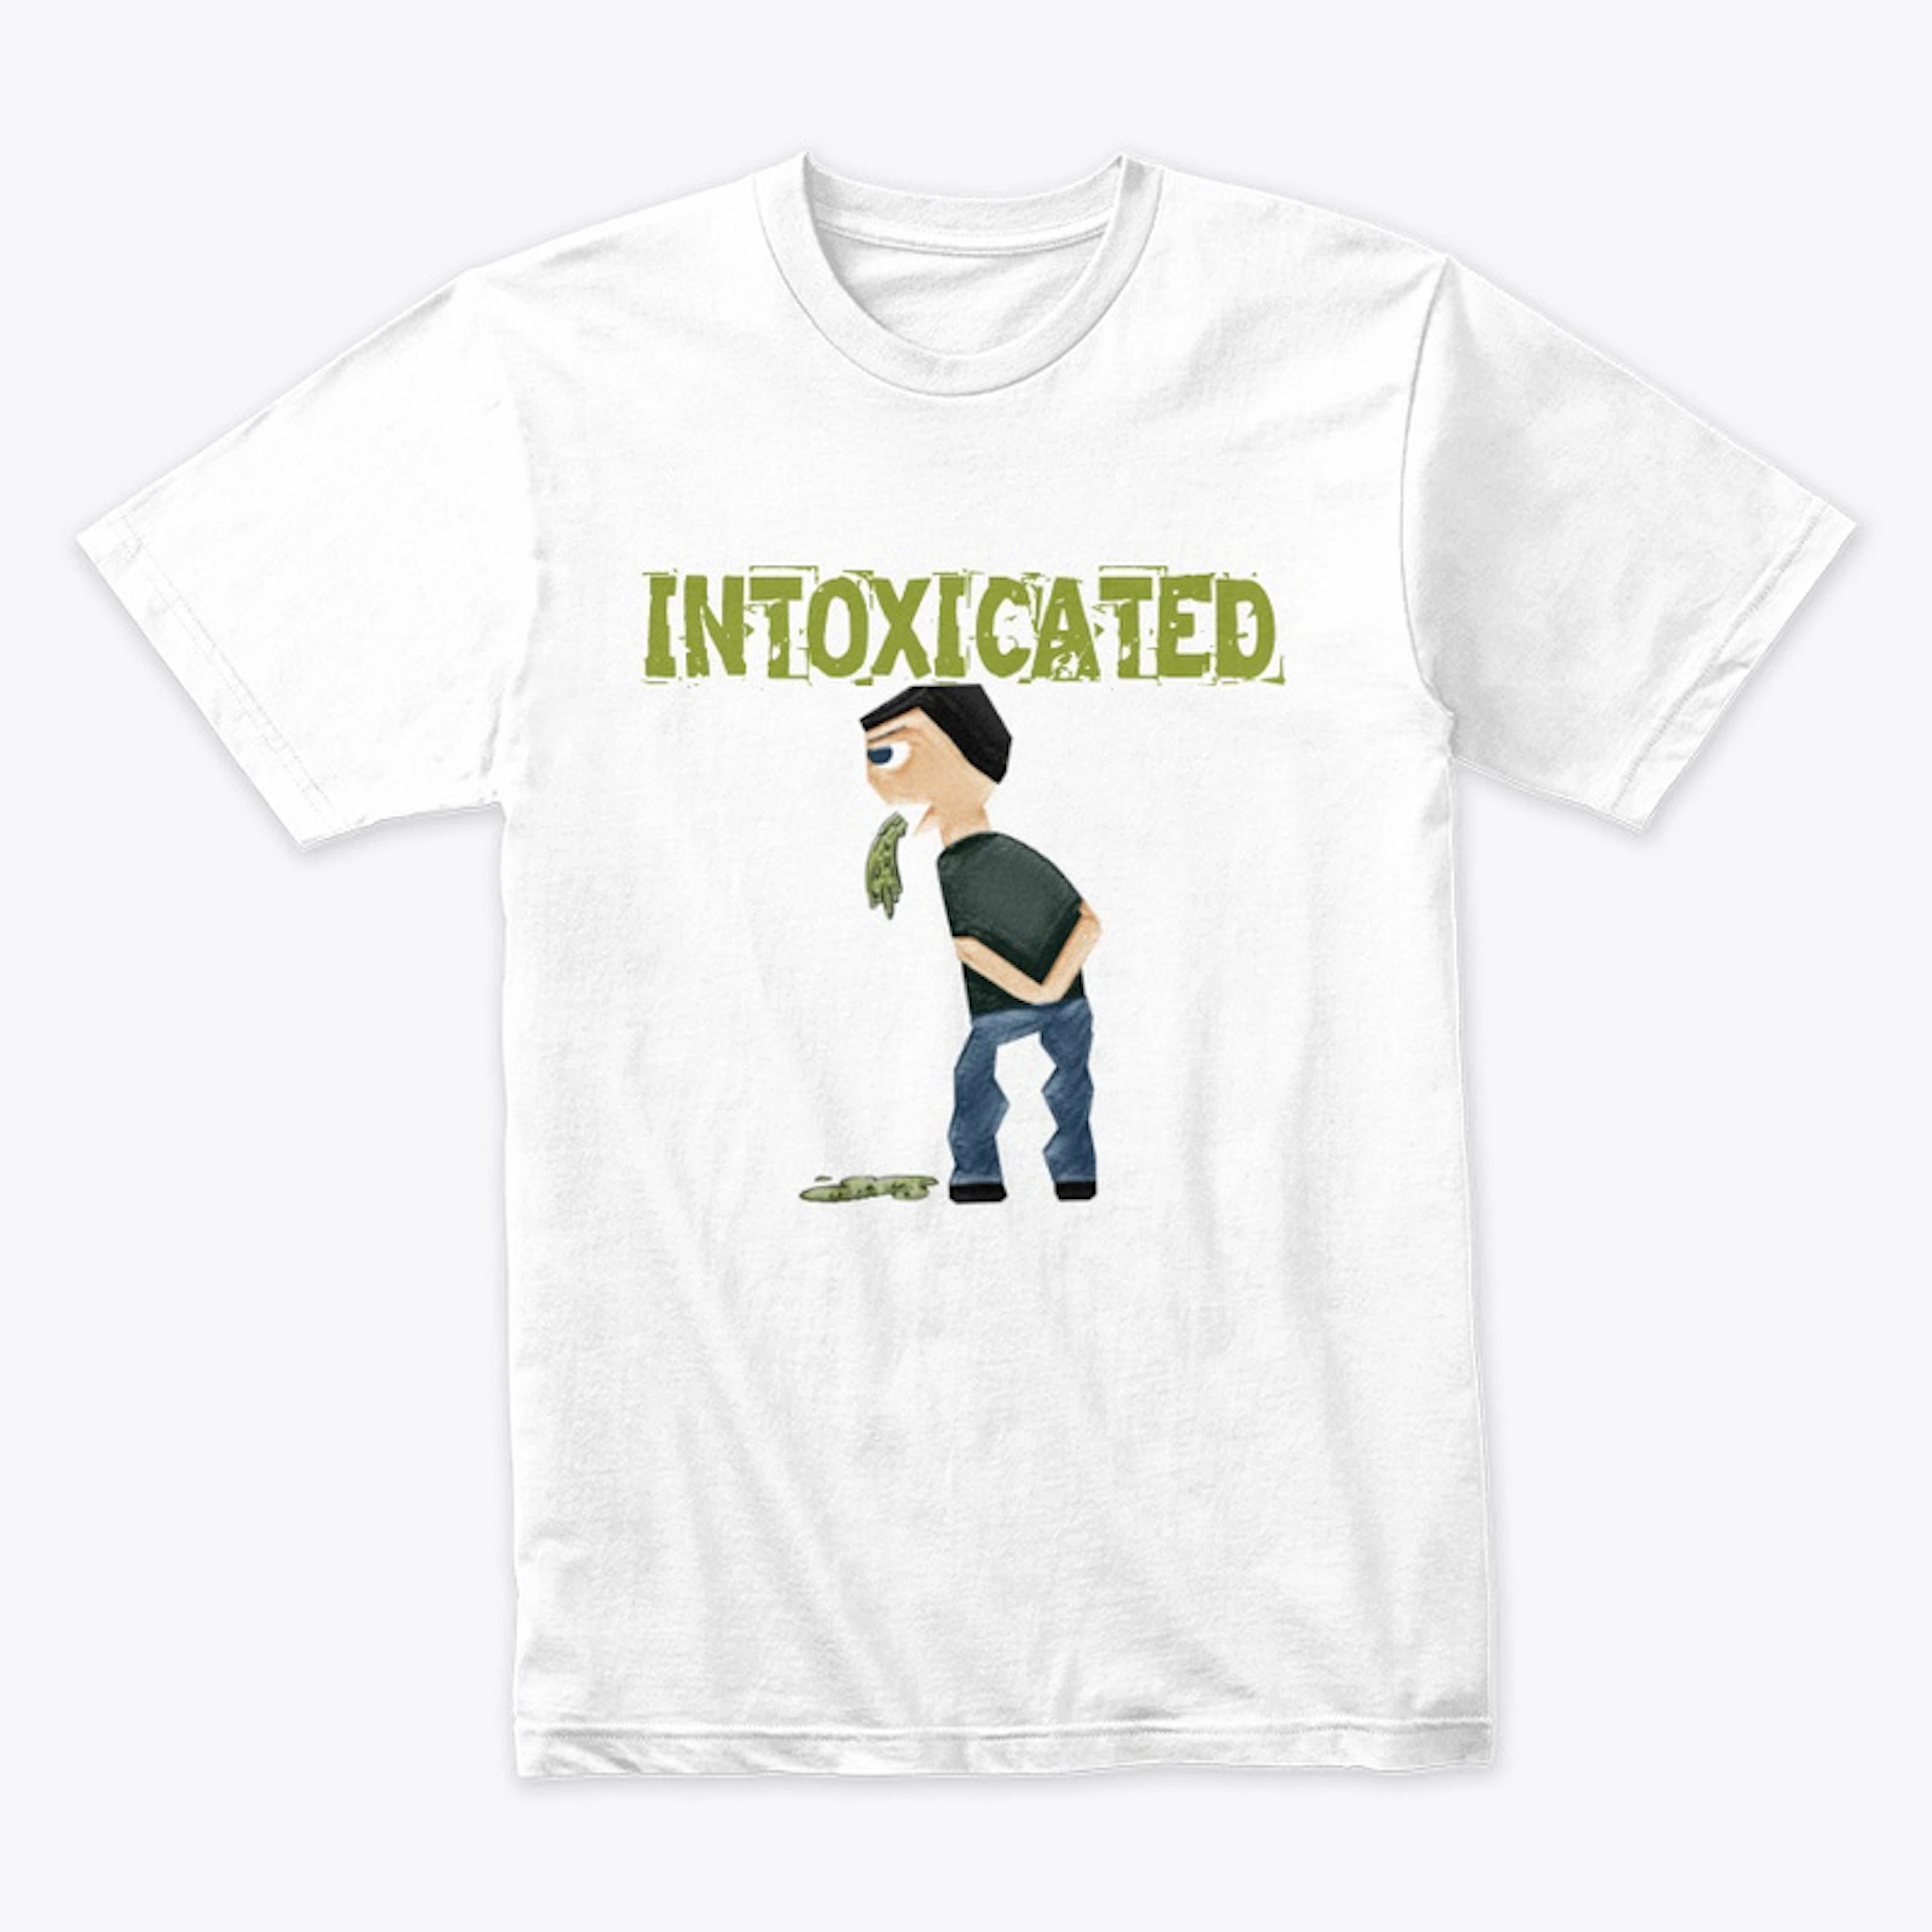 "INTOXICATED" Design.